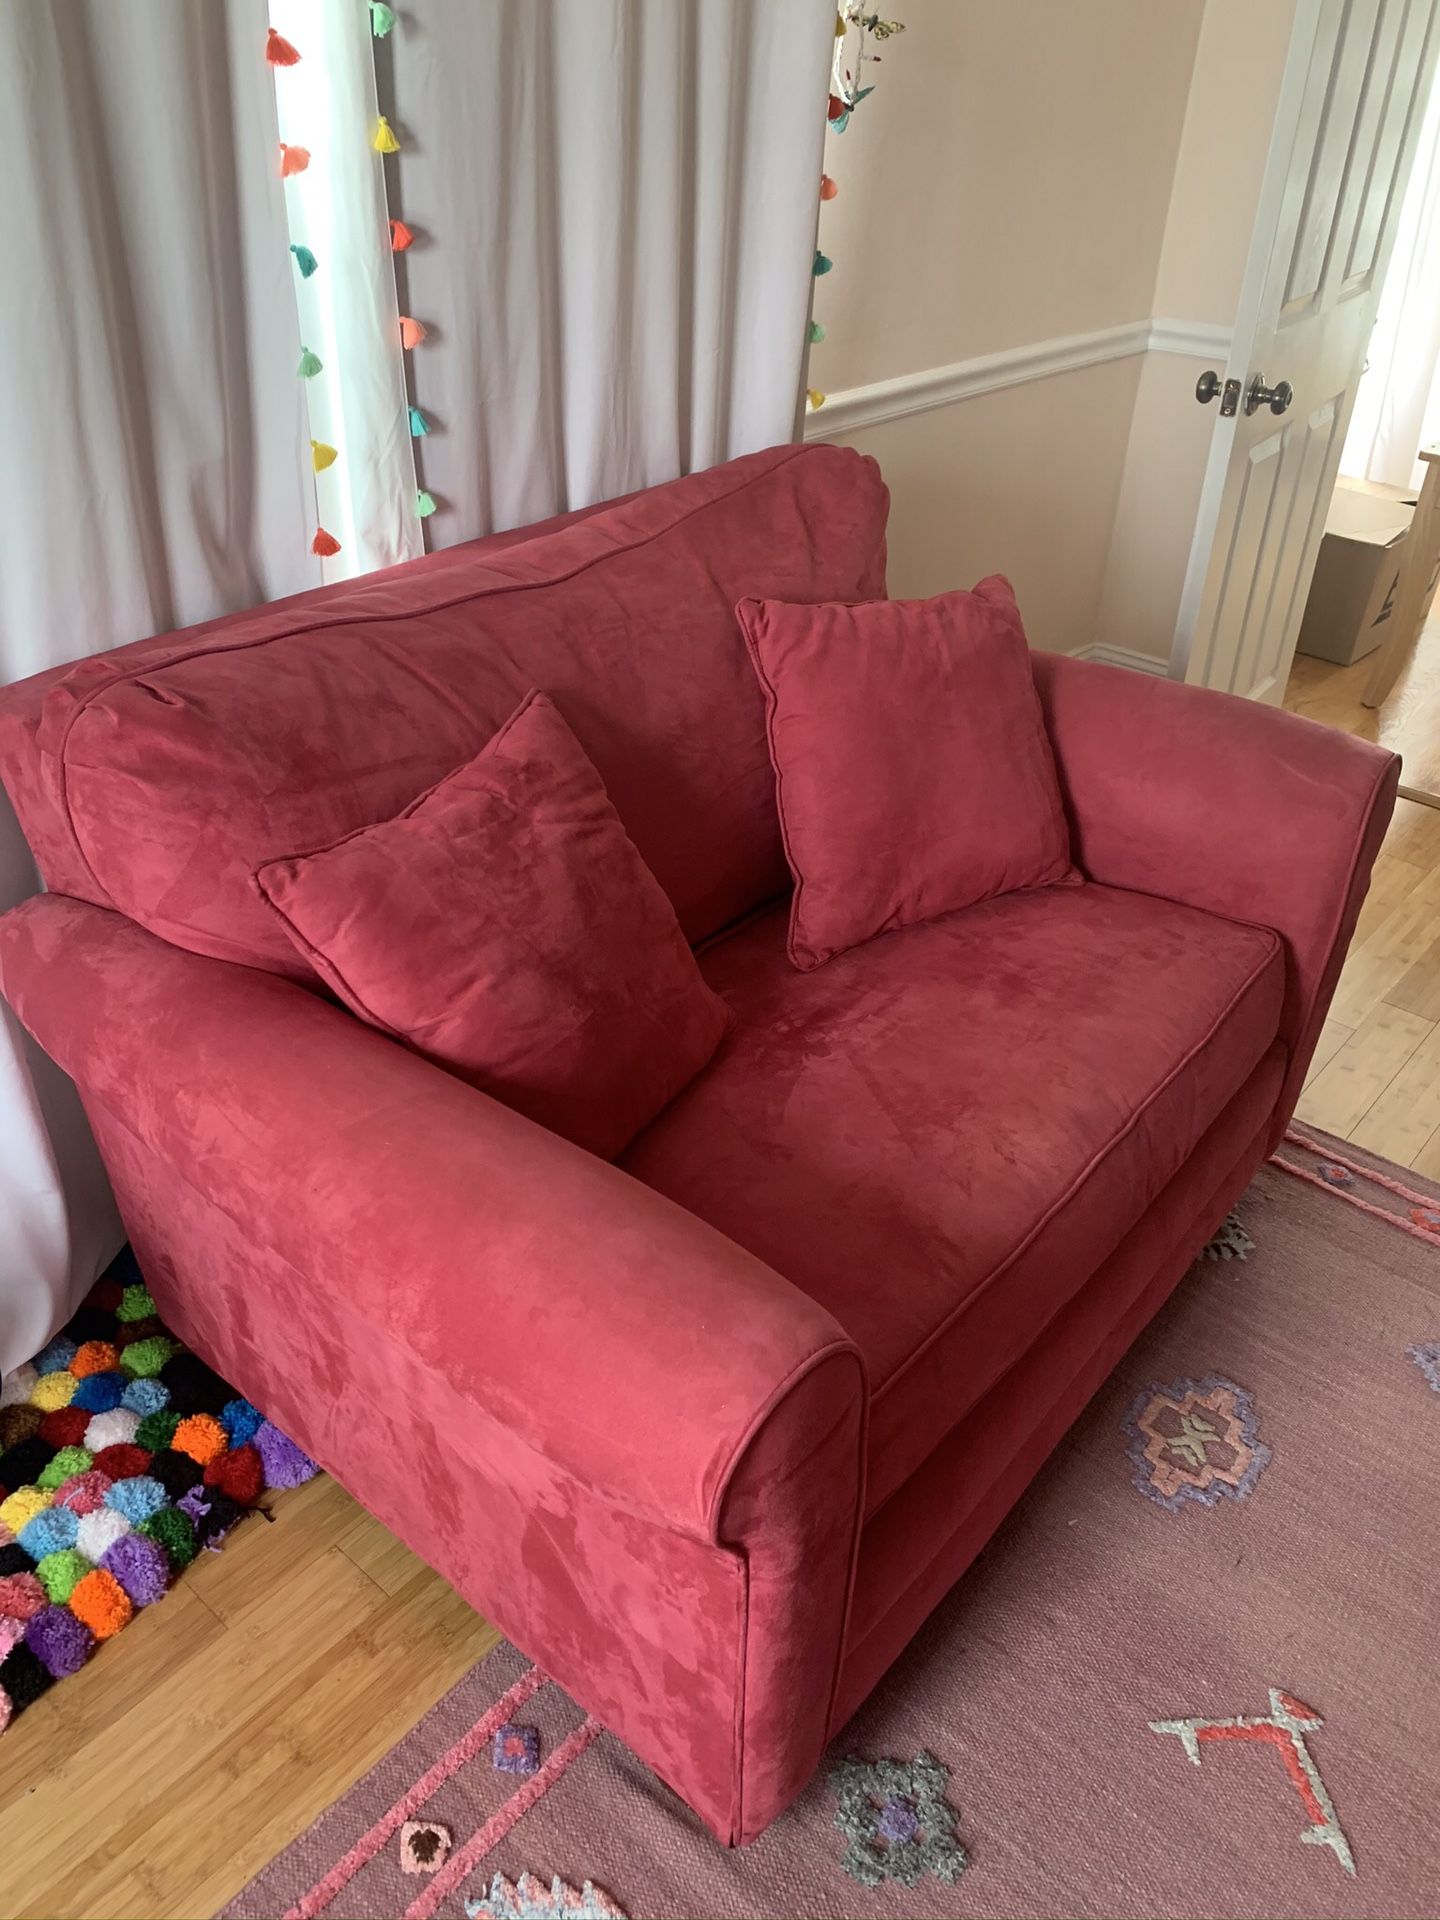 Red pull out sleeper couch 58w x 41 with matching storage ottoman 26x41 ottoman small tear in corner (pictured) can be fixed if u know how to sow